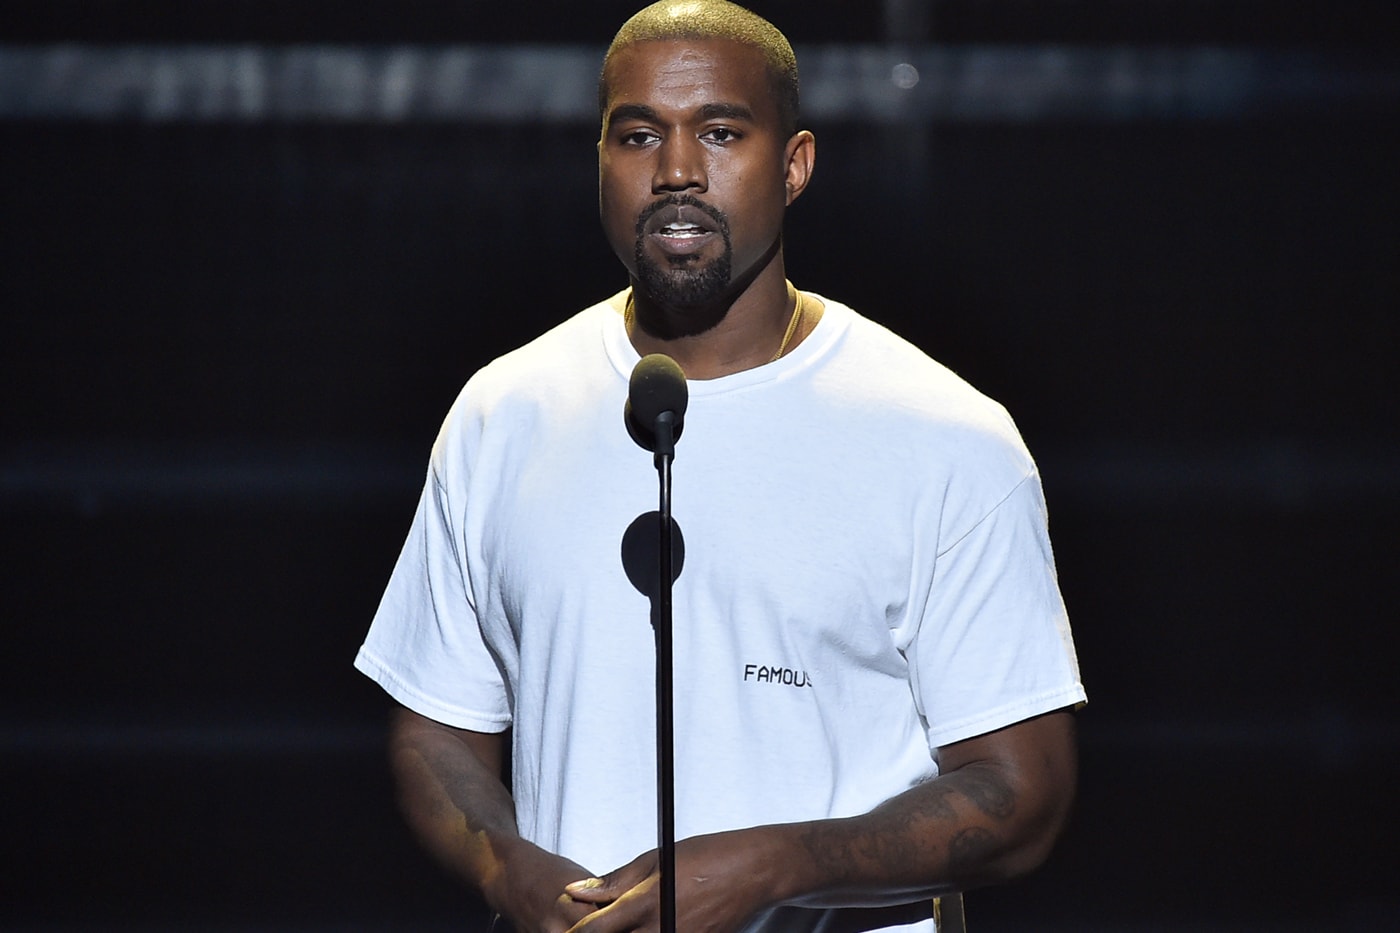 kanye-west-famous-screenings-across-the-us